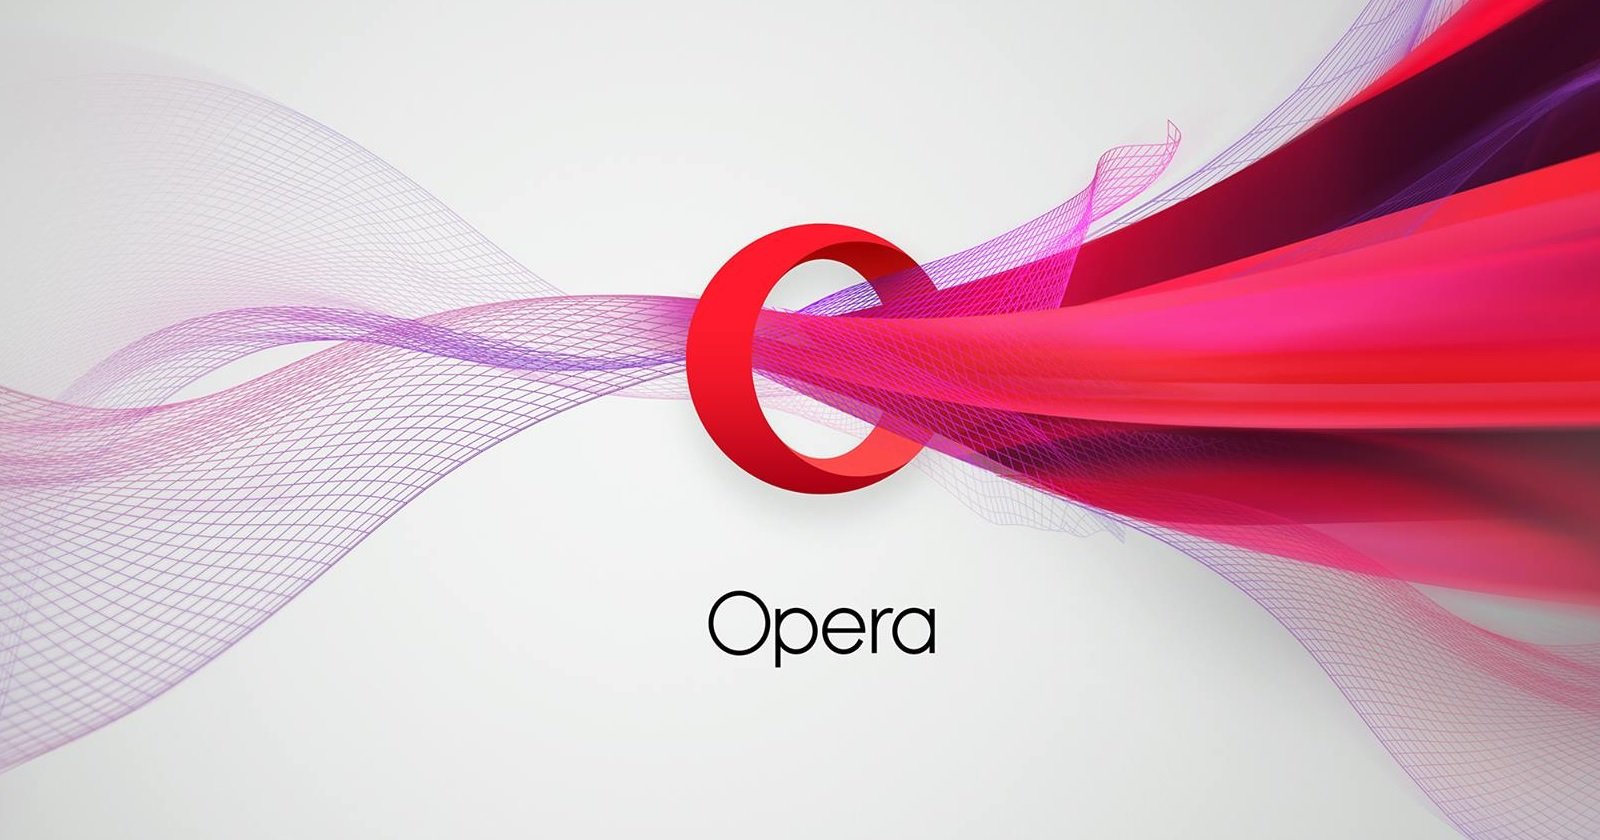 Opera sees big jump in EU users on iOS, Android after DMA update – Source: www.bleepingcomputer.com